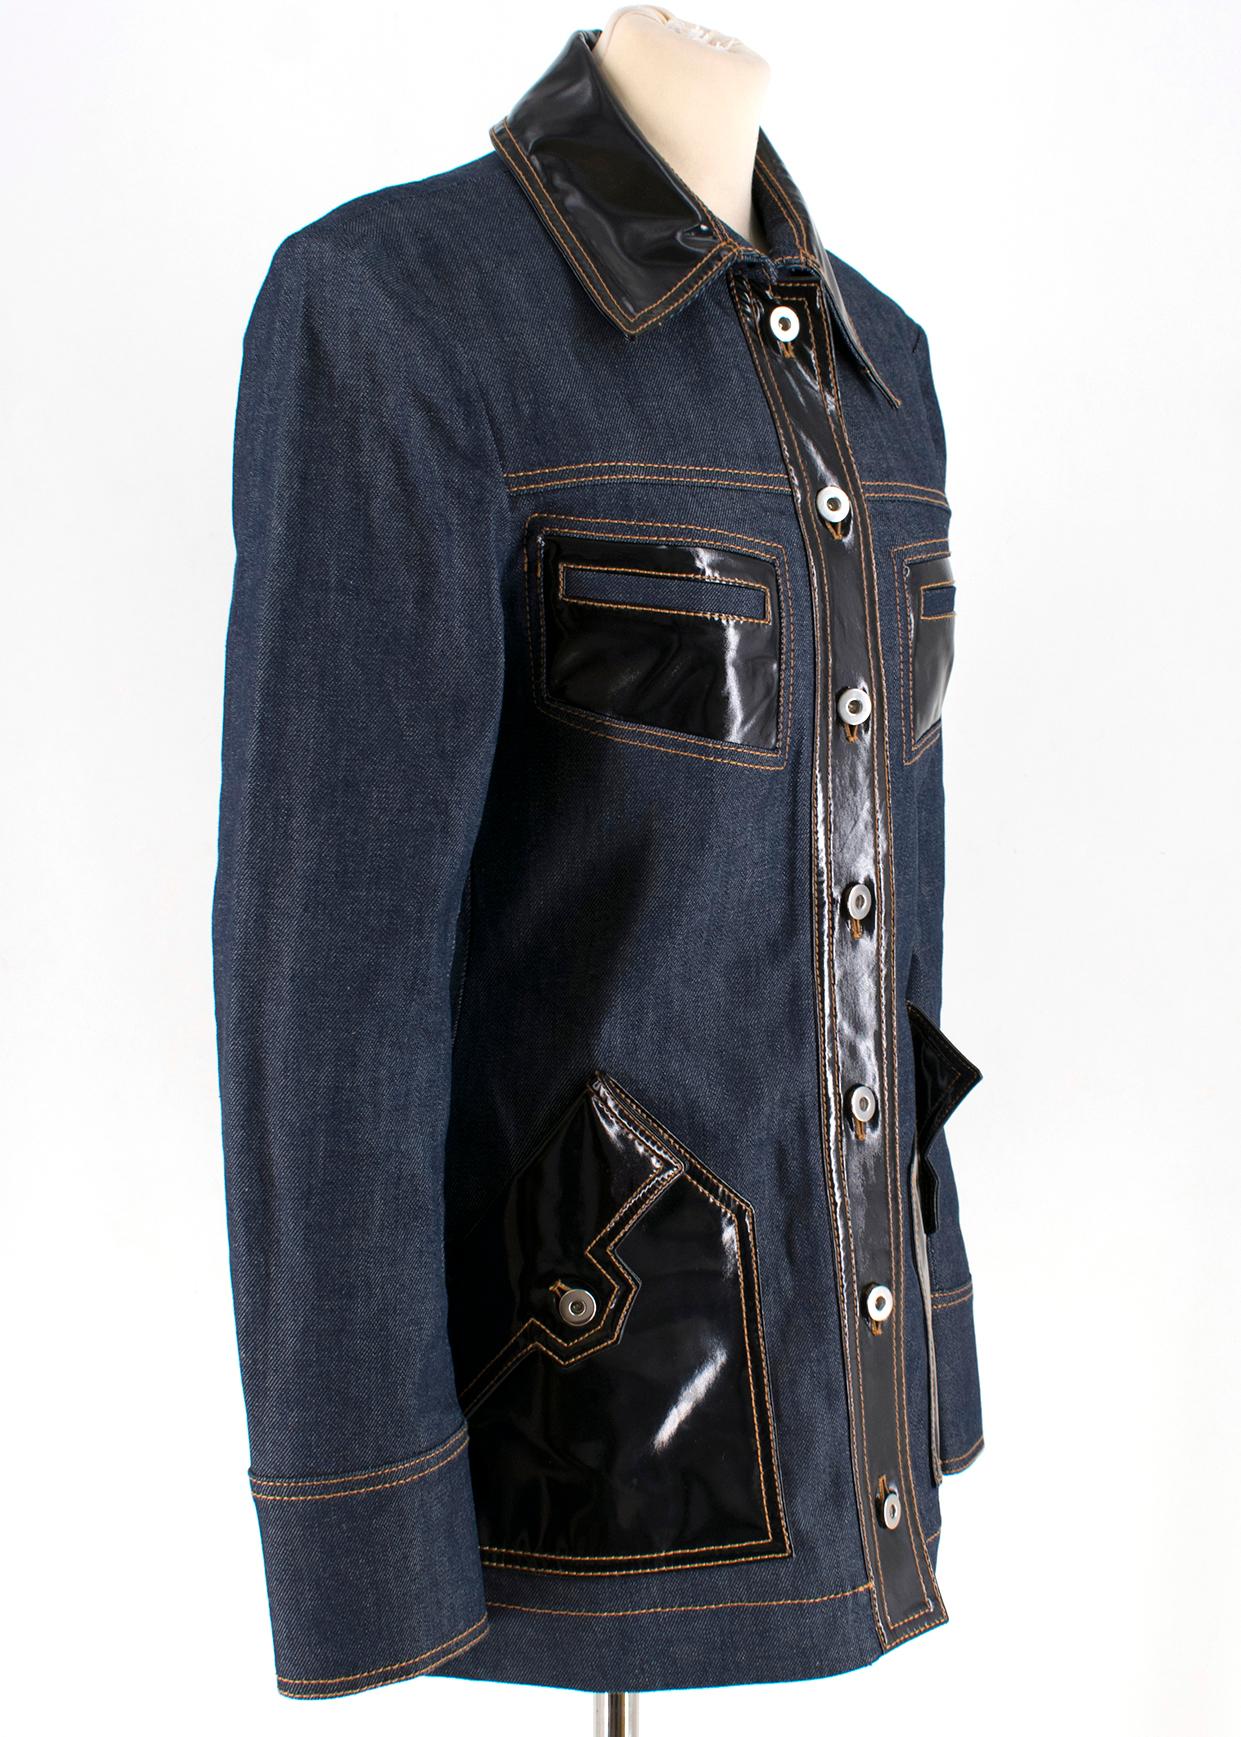 Ellery Vinyl-Panel Denim Jacket

- blue denim jacket 
- black vinyl embellishment to the front pockets and collar
- button fastening to the front
- flap pockets to the front
- unlined

Please note, these items are pre-owned and may show some signs